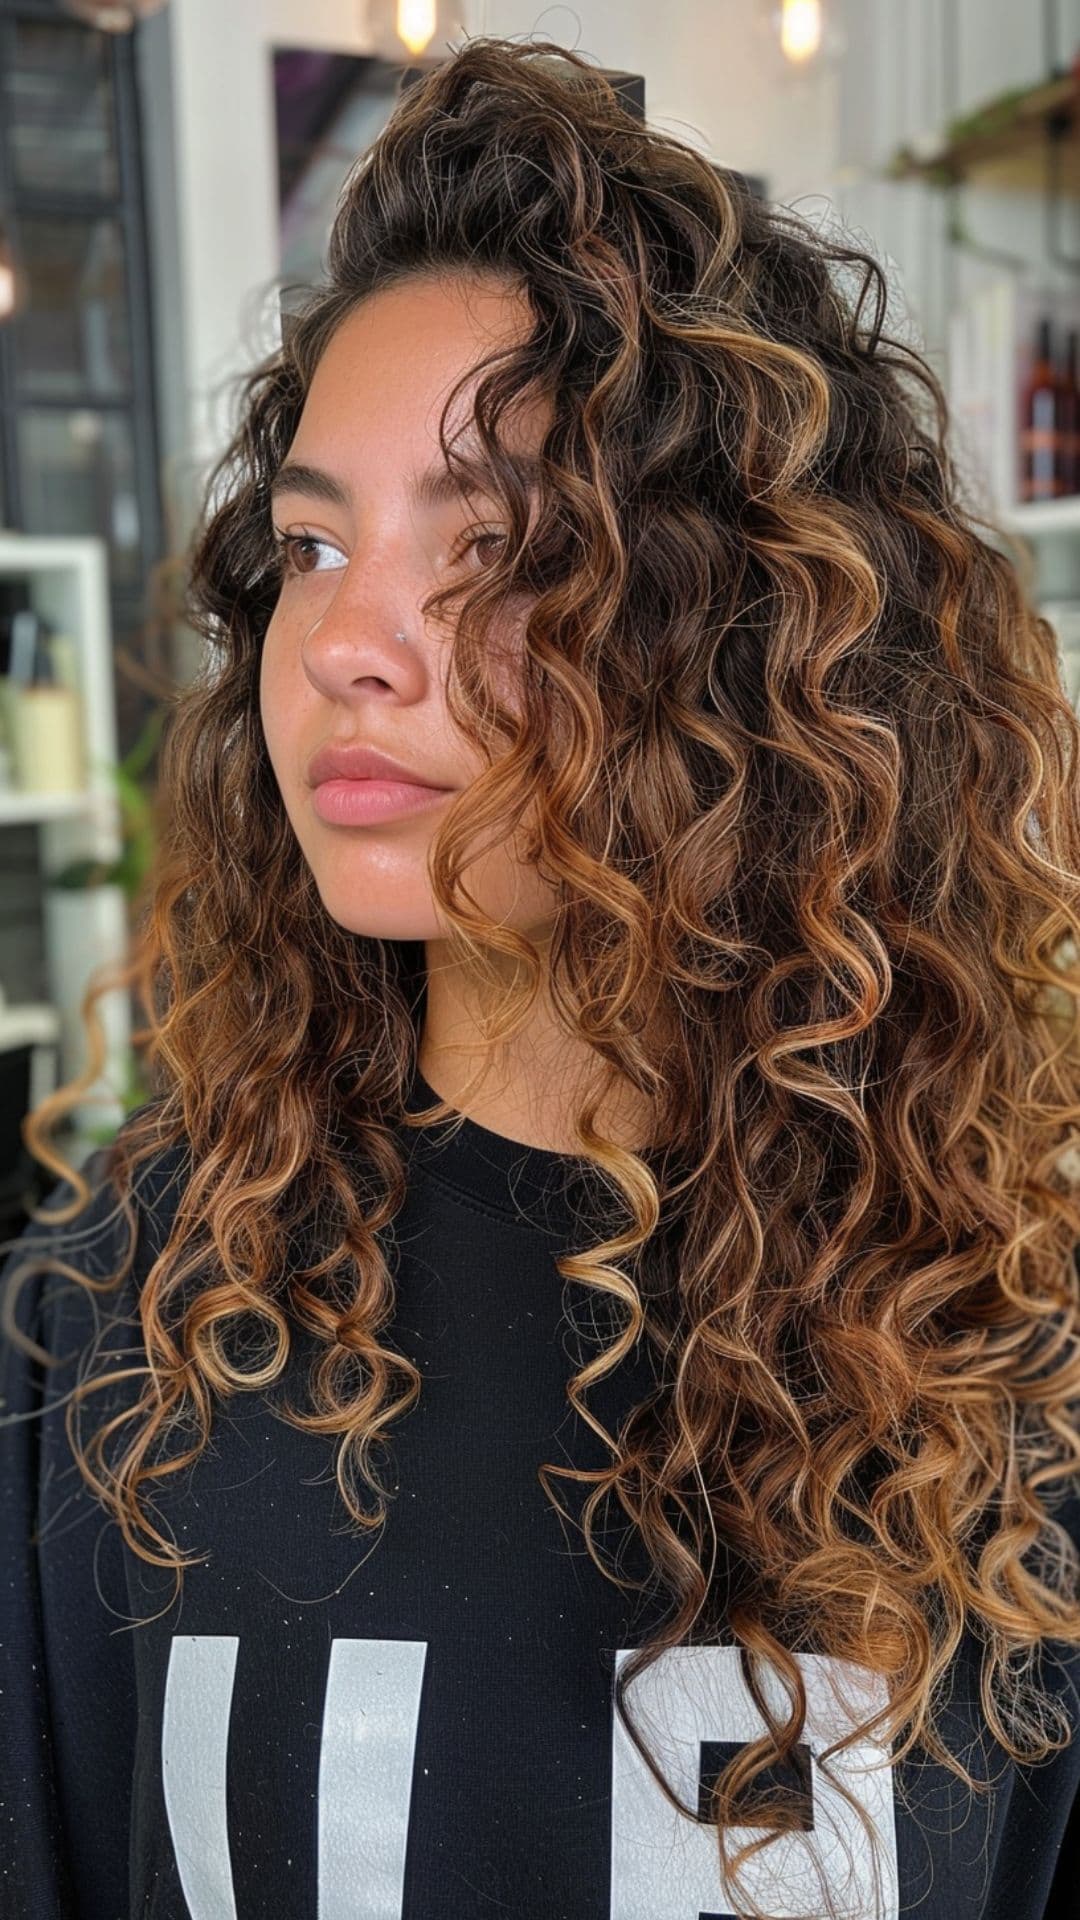 A woman modelling a bronze balayage curly hair.